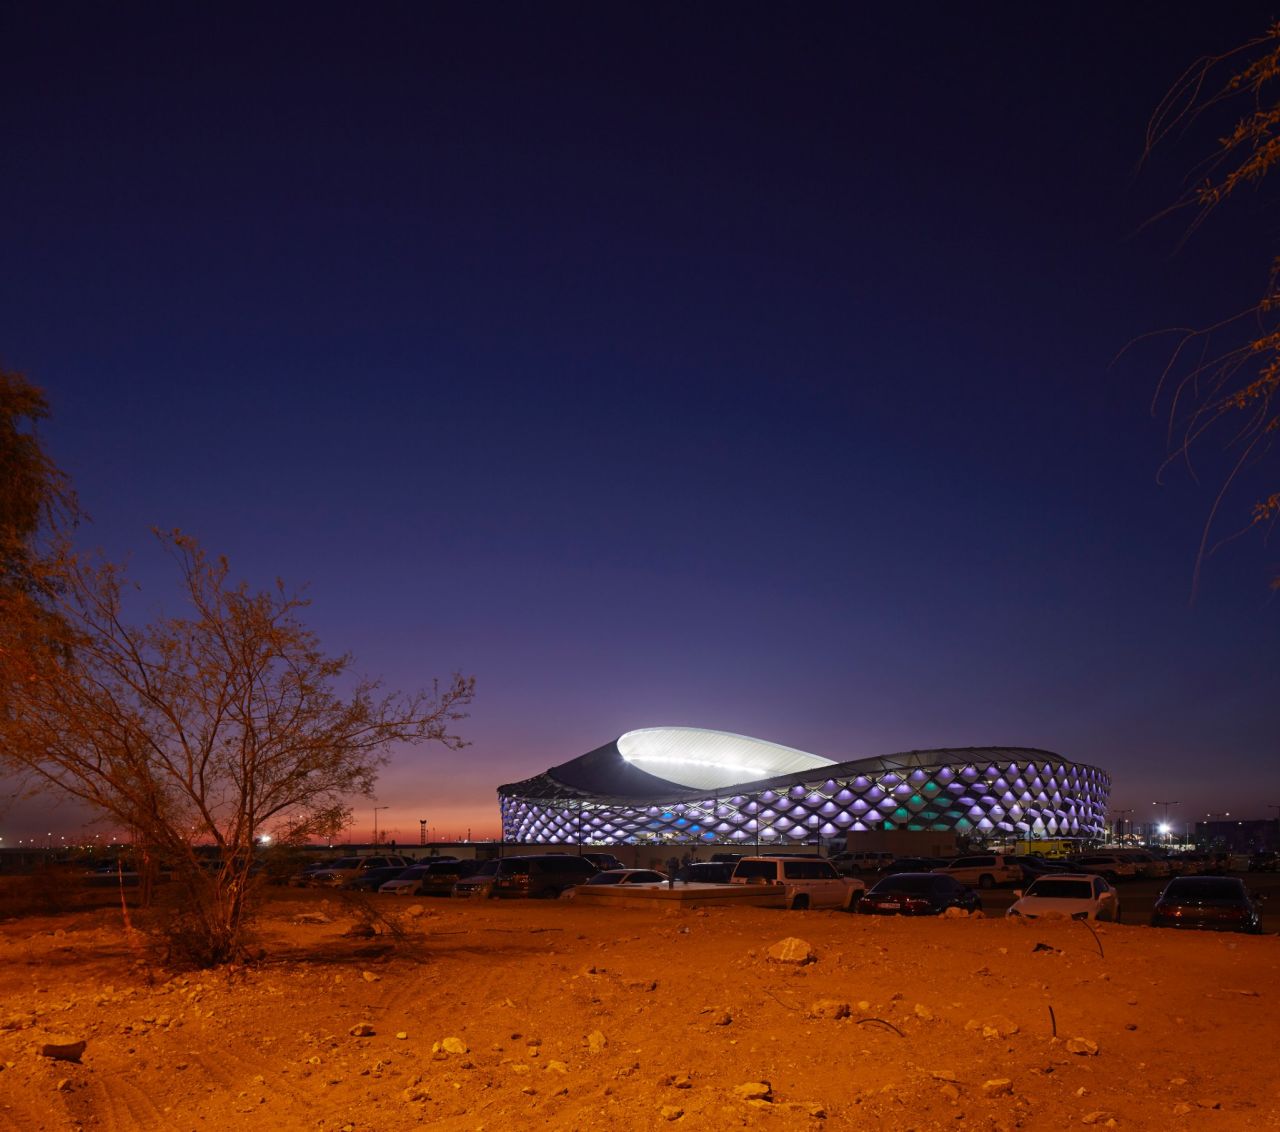 One of Pattern Design's main challenges was to create a structure that could withstand the hot and dry climate of Al Ain. The sinuous and gravity-bending parasol roof is inspired by the Arabic headdress. The roof's design is a departure from traditional European stadium roofs -- which are intended for wetter climates. This one shades spectators, but allows for enough sunlight to hit the pitch. The firm is currently designing Al Rayyan Stadium for the 2022 FIFA World Cup in Qatar.